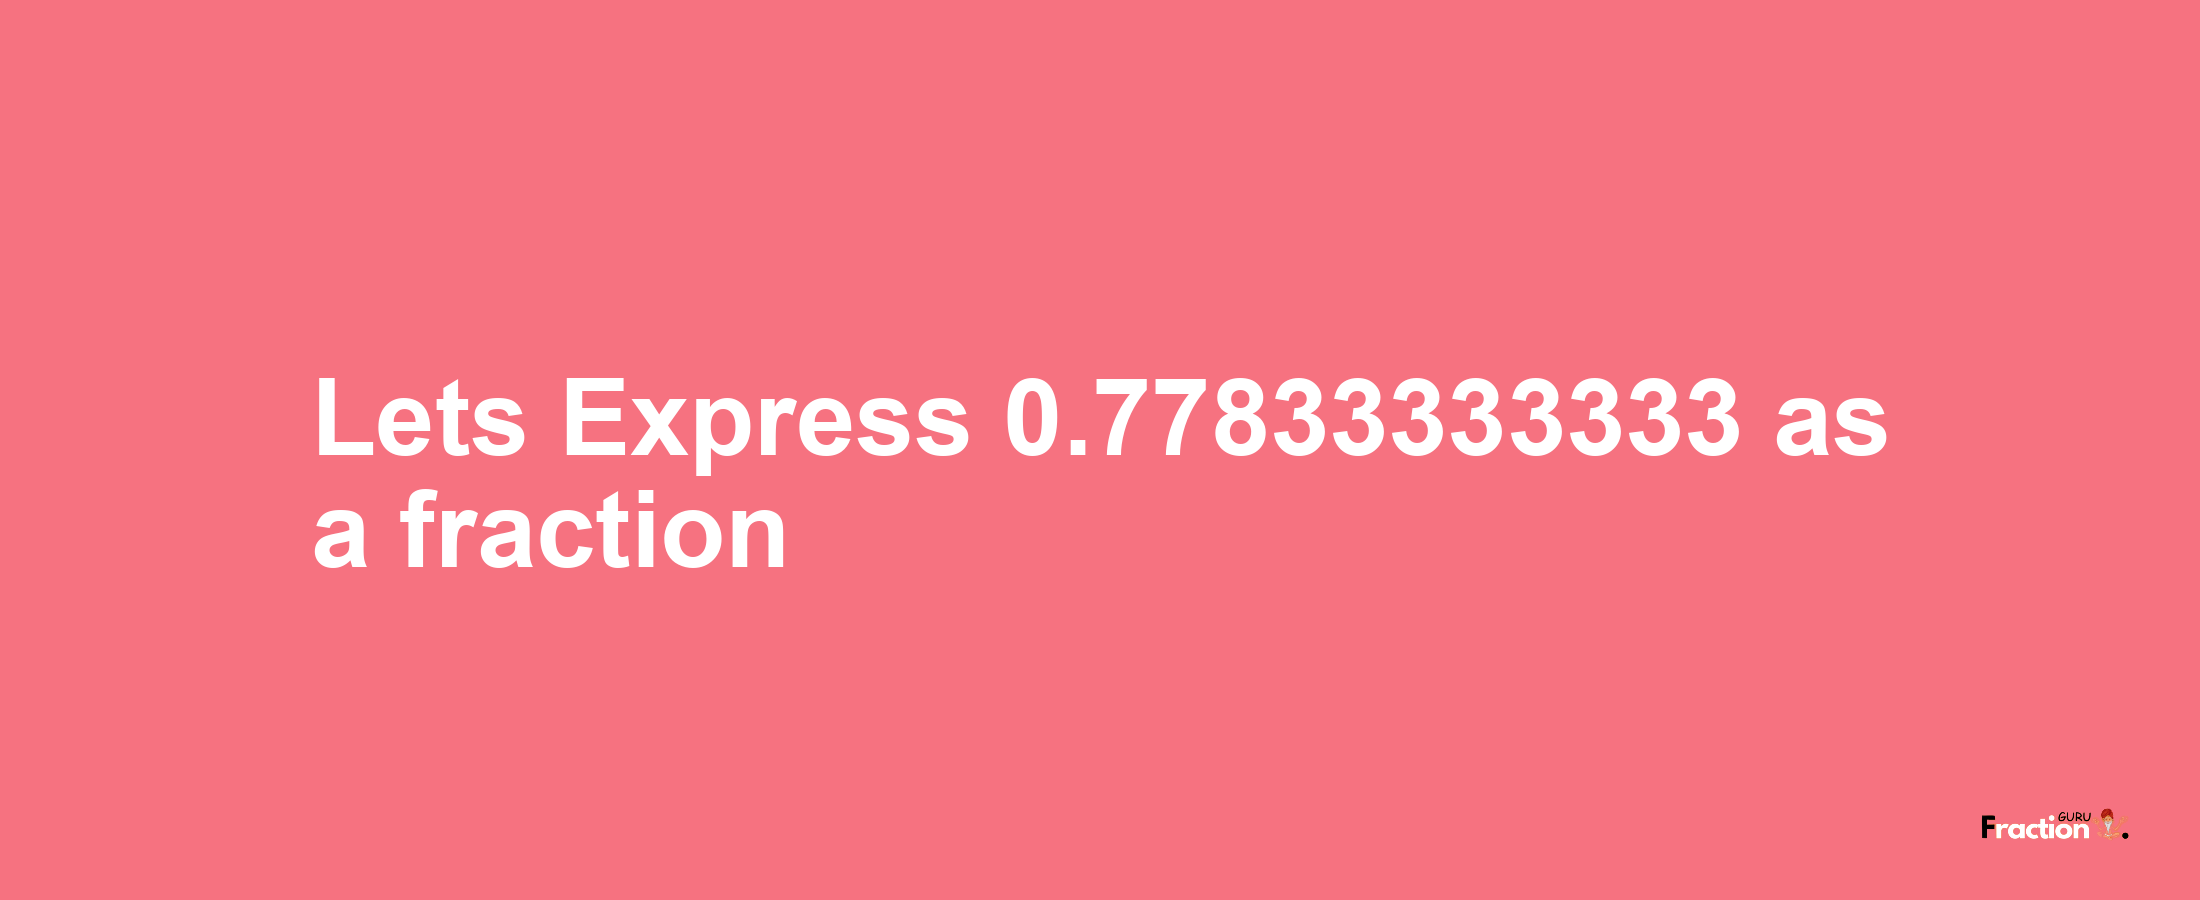 Lets Express 0.77833333333 as afraction